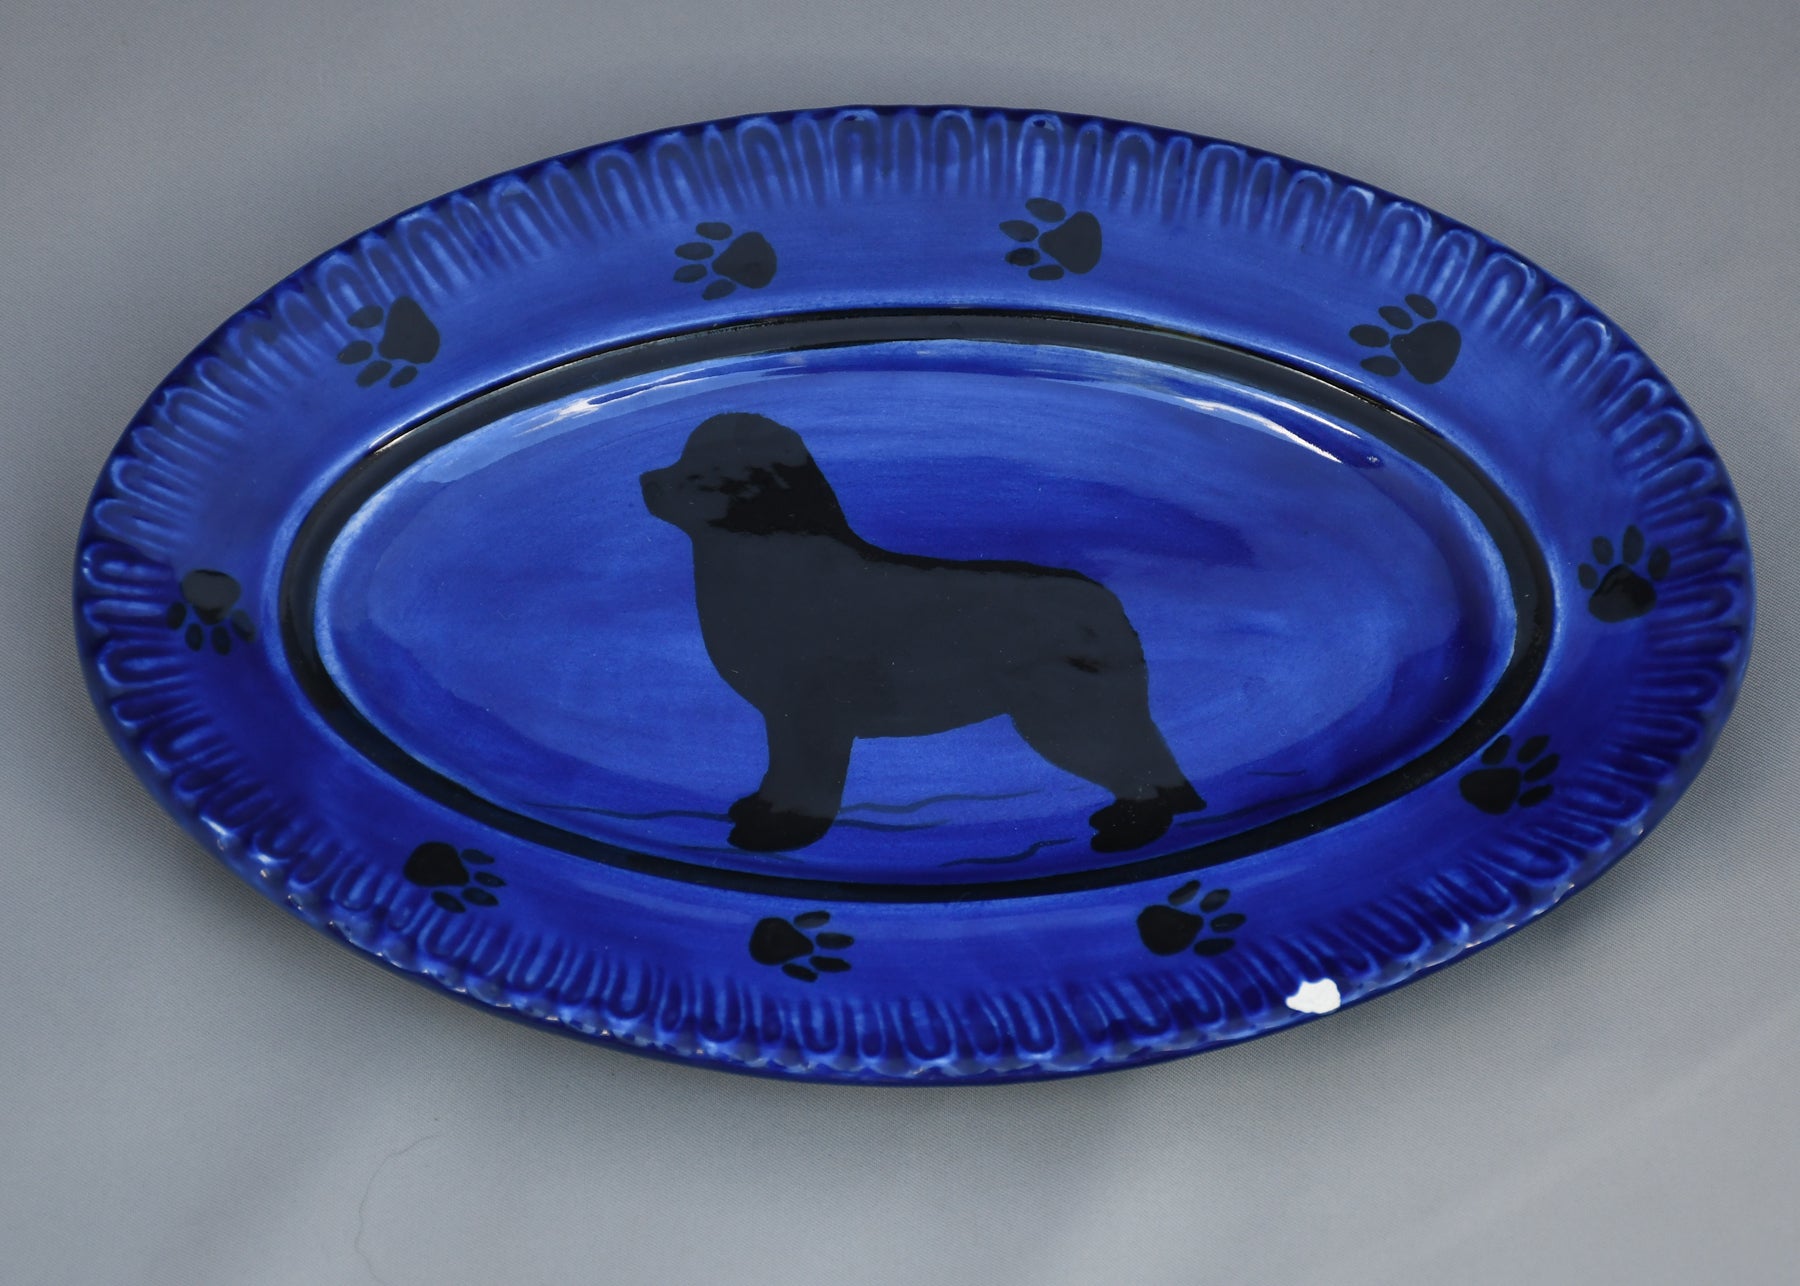 hand painted newfie plate (has small chip)